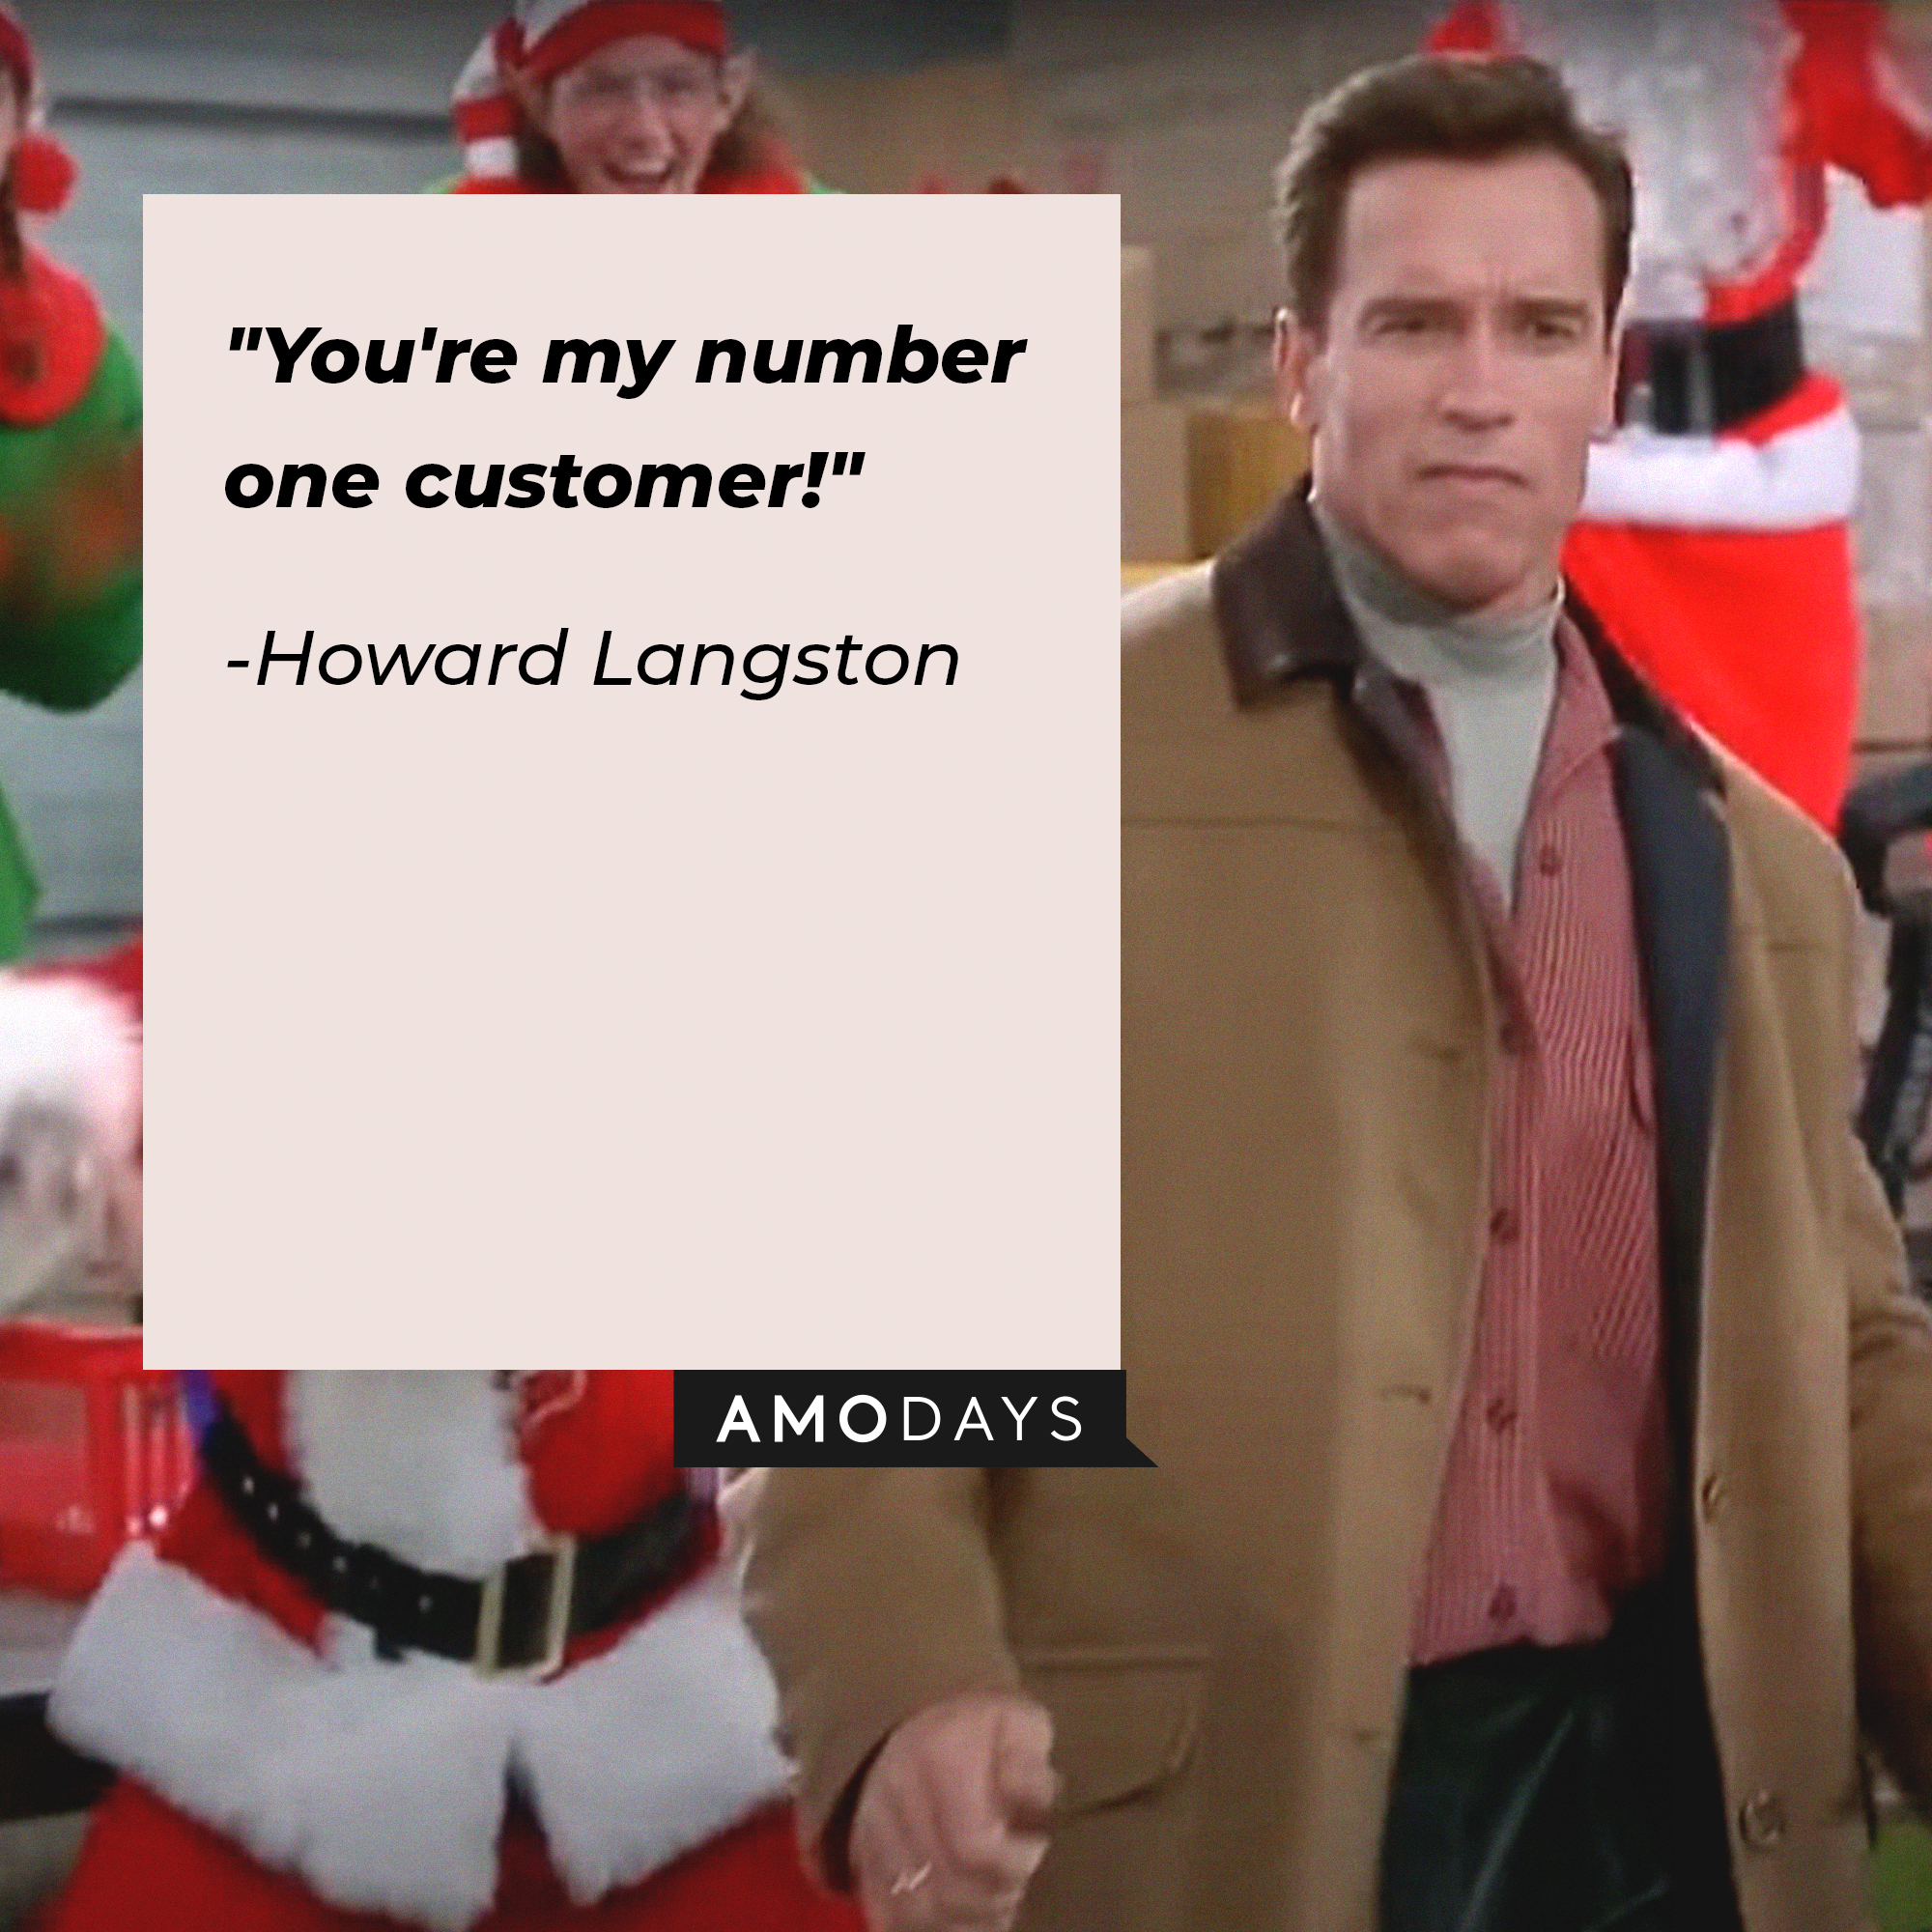 Howard Langston's quote: "You're my number one customer!" | Source: Facebook.com/JingleAllTheWayMovies